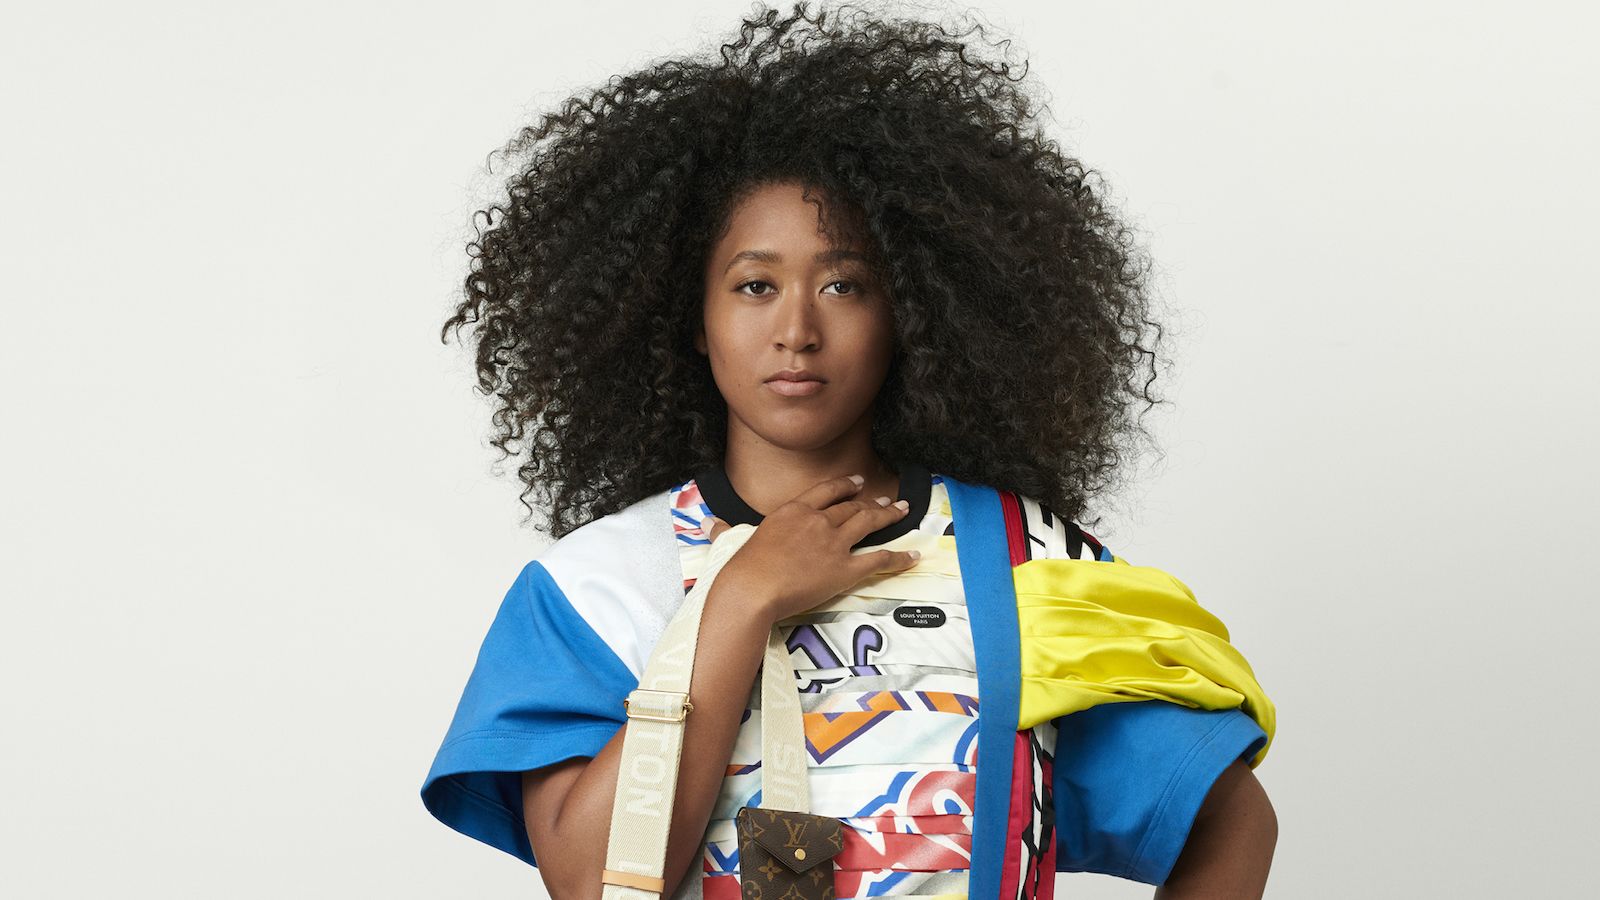 Louis Vuitton reinvents its Twist bag in summer campaign featuring Naomi  Osaka - Masala